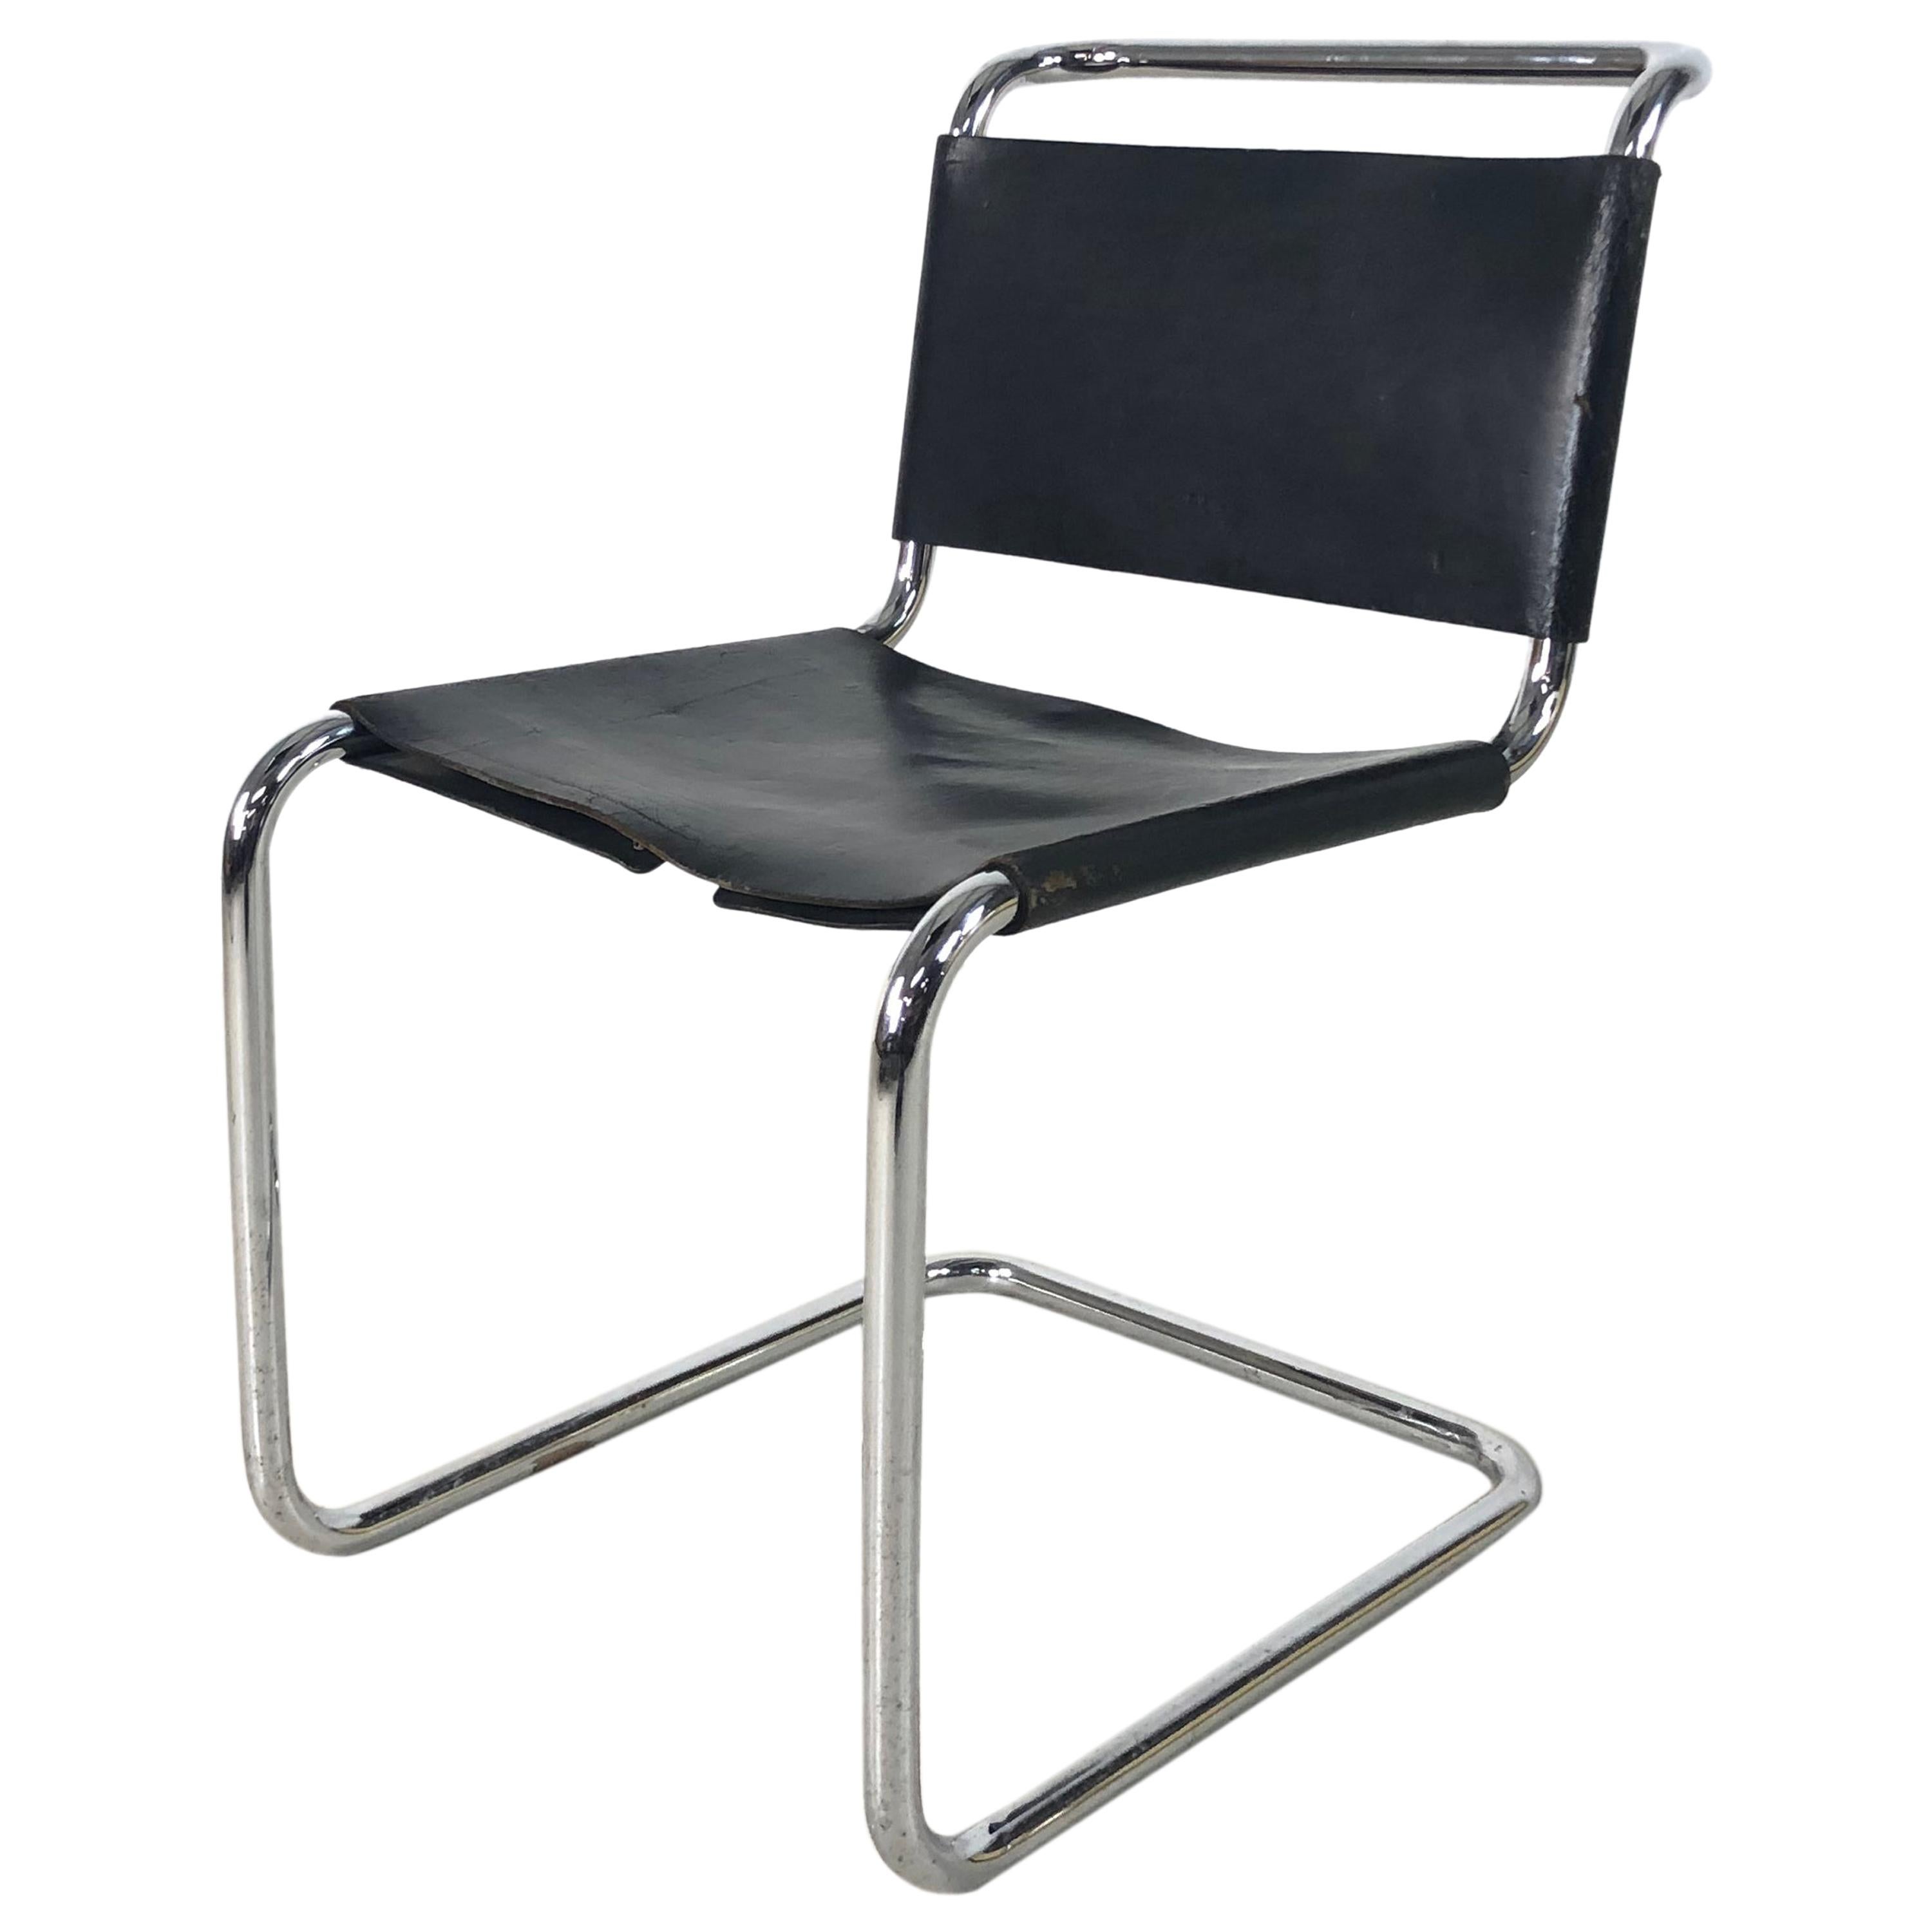 Midcentury Marcel Breuer Style Black Leather and Chrome Cantilever Dining Chair